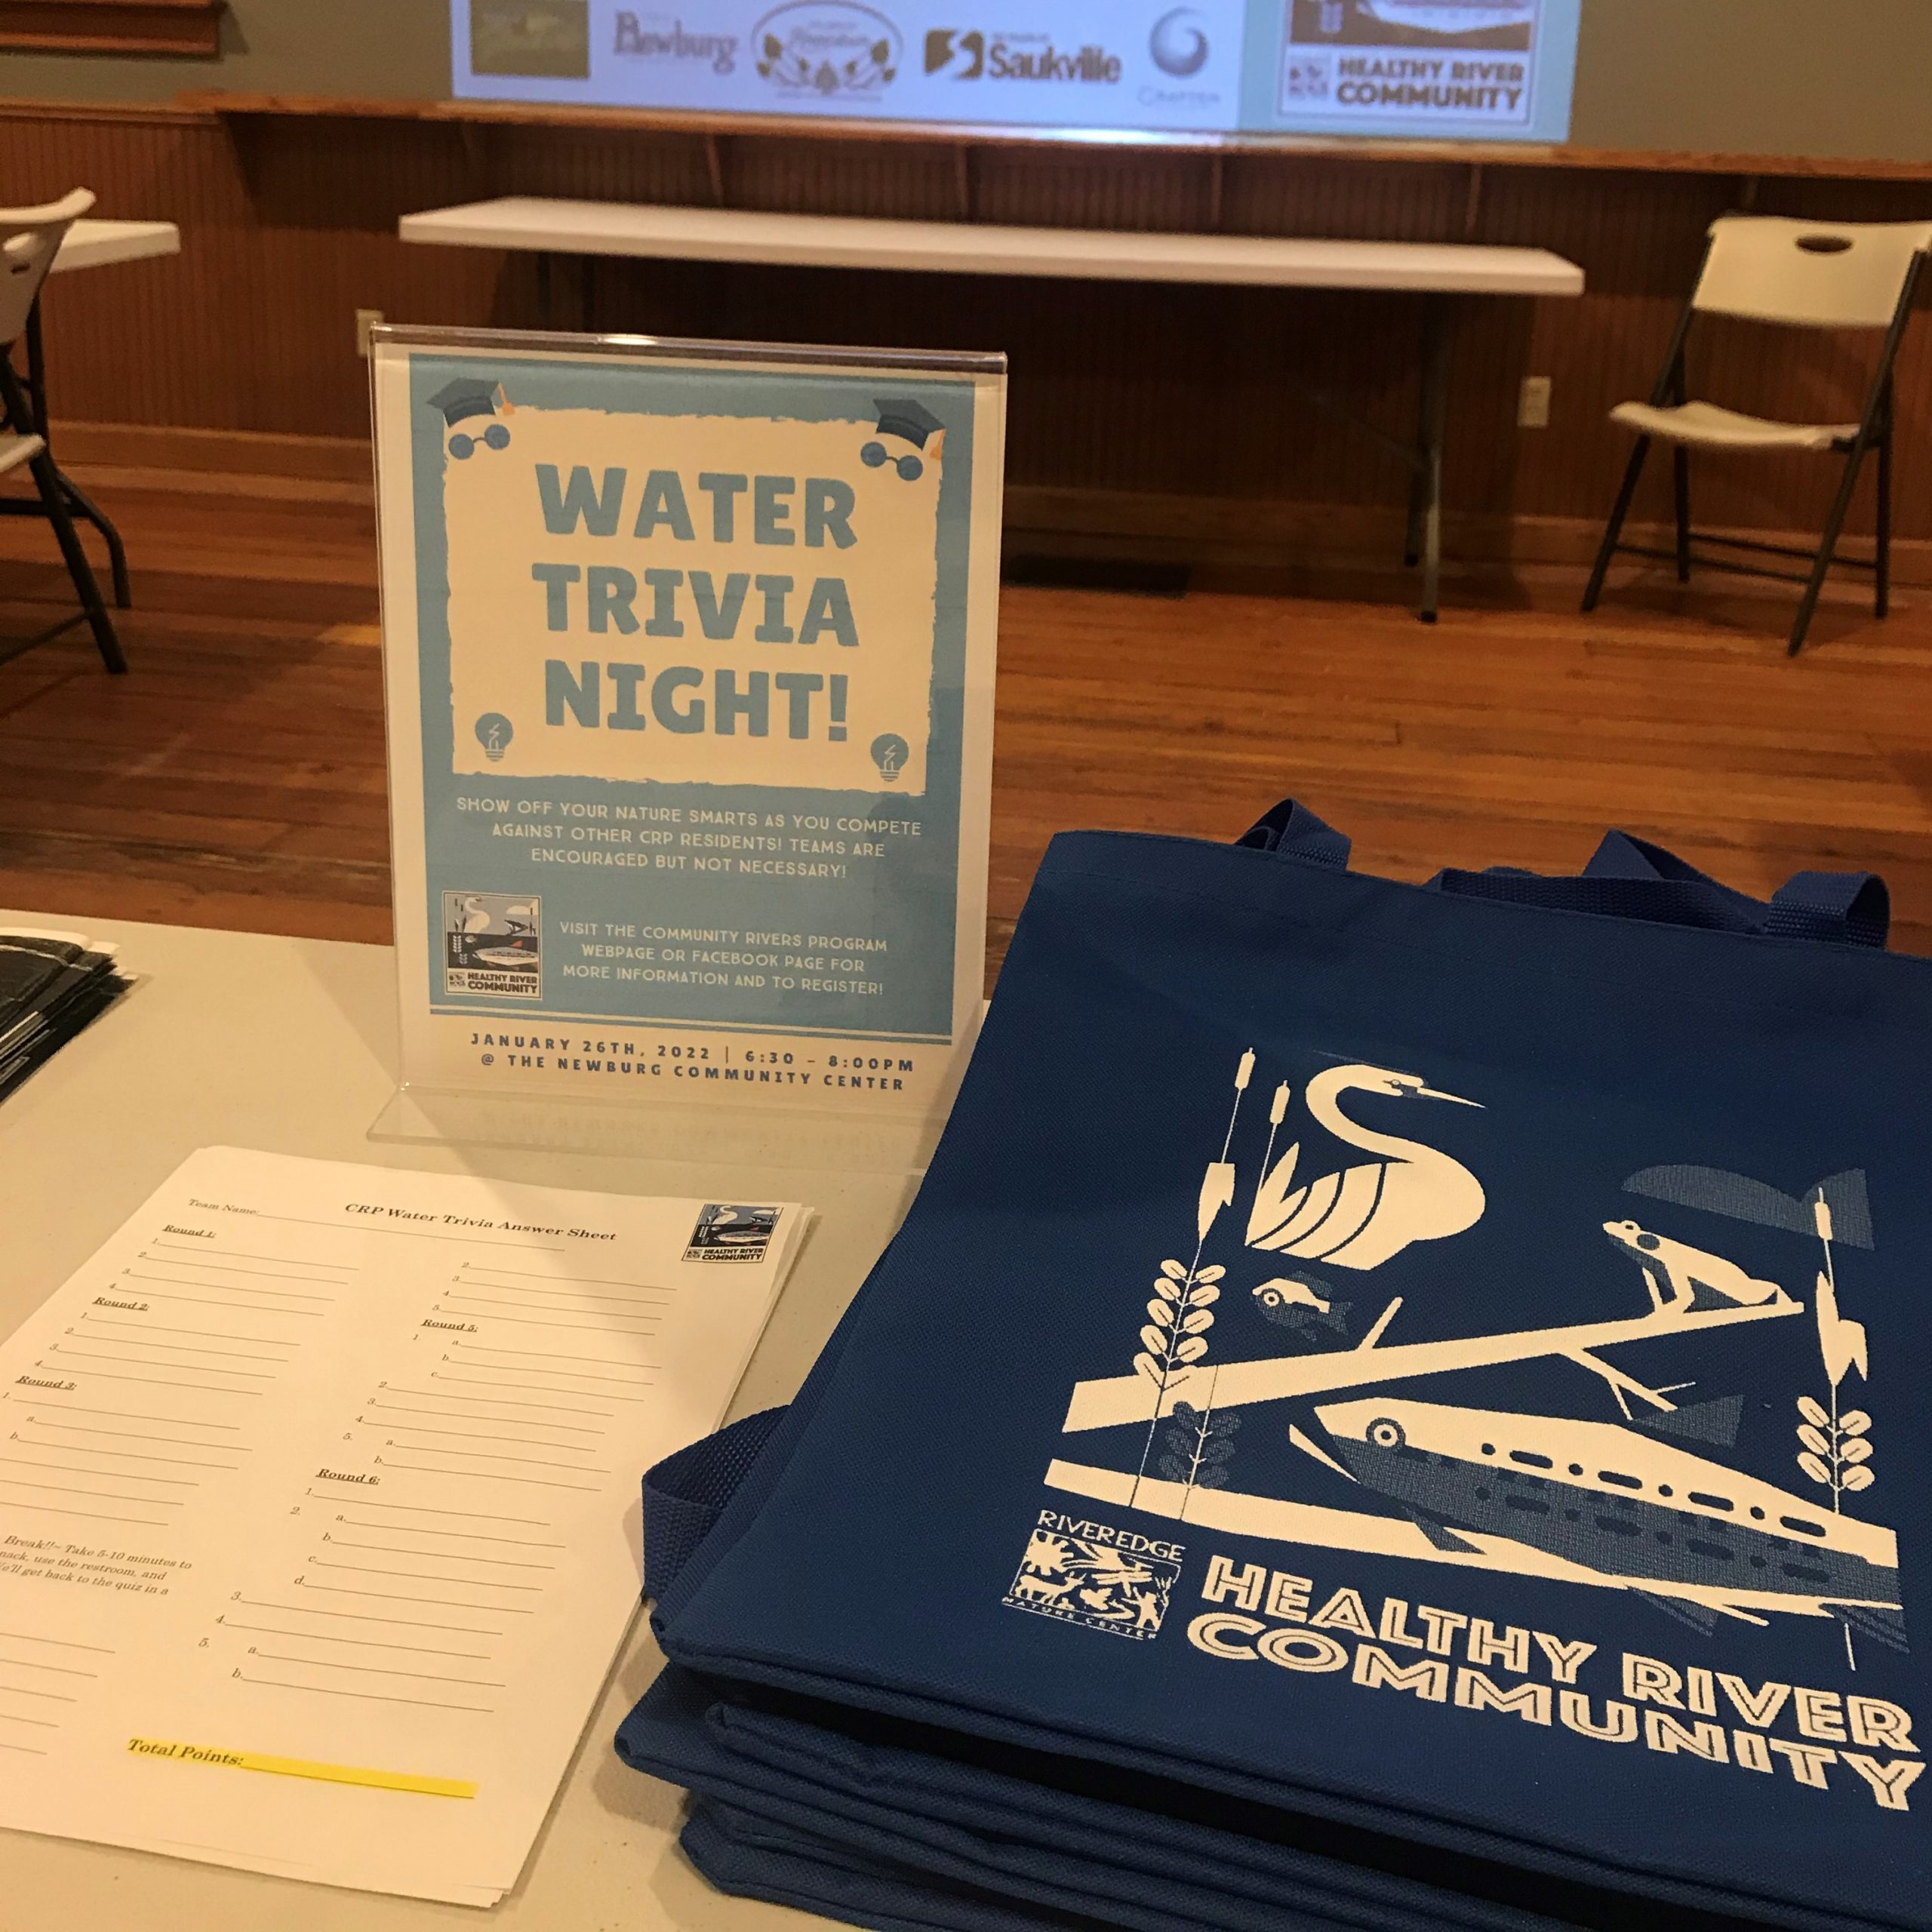 projector displaying "Trivia Night" with a light bulb icon. In the foreground is a table with another display for trivia night and a stack of dark blue "Healthy River Community" tee shirts